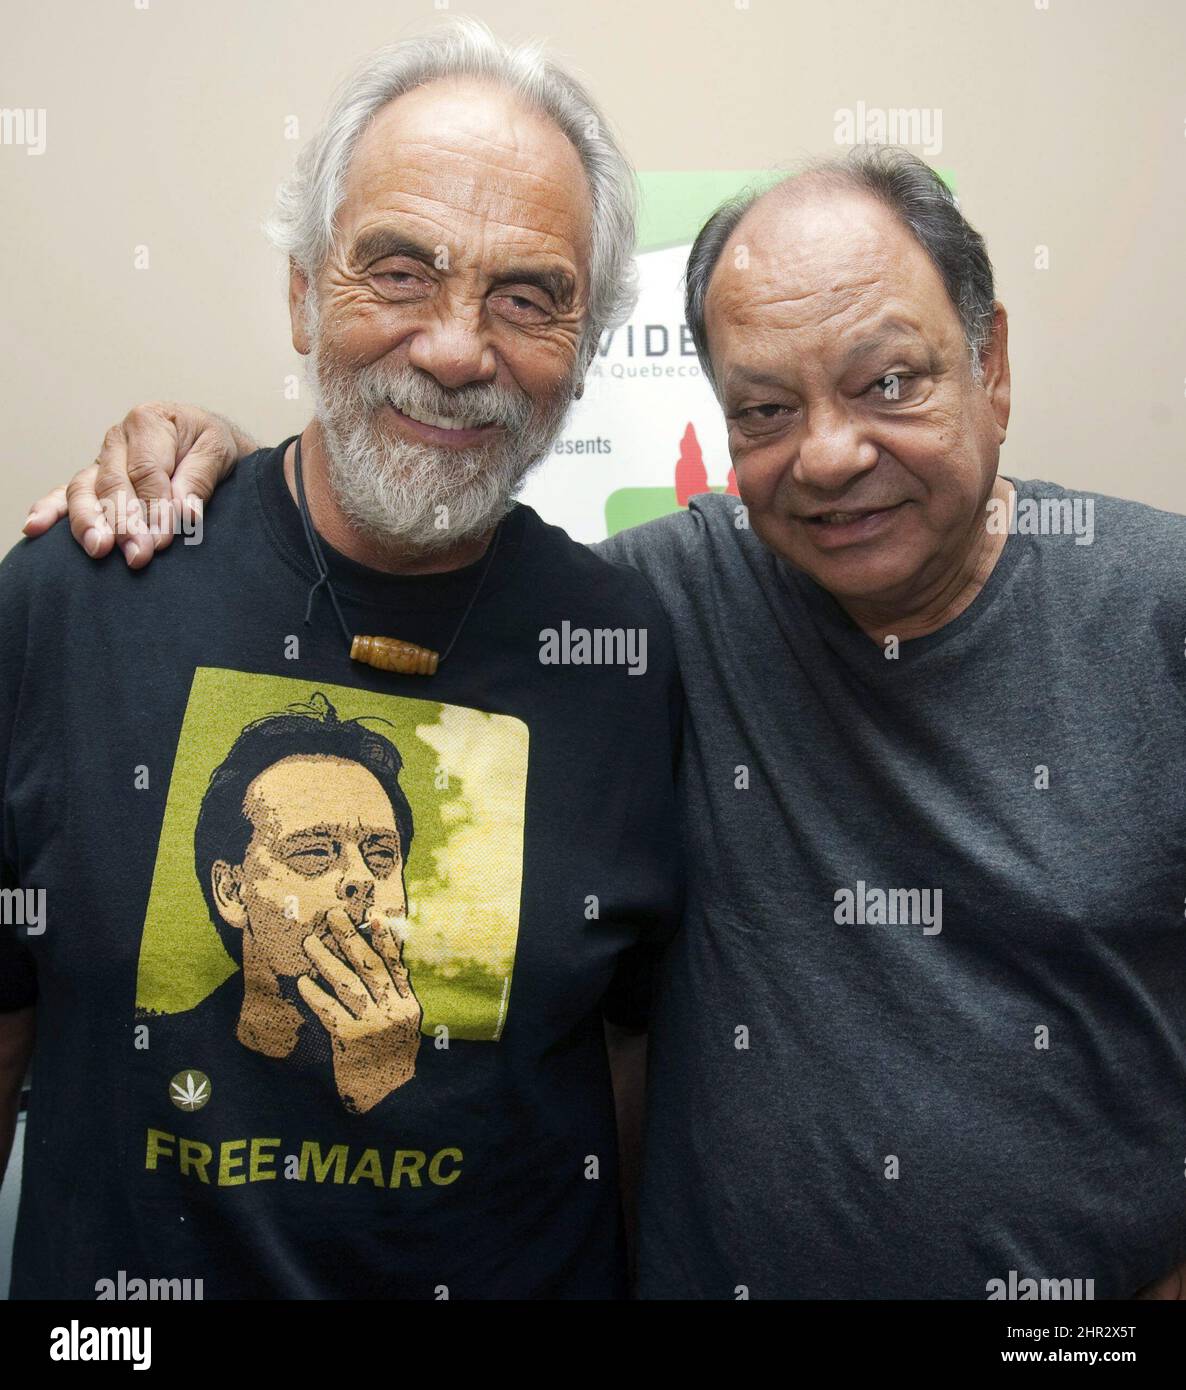 Tommy Chong, left, and Richard 'Cheech' Marin, pose with a Marc Emery shirt on July 15, 2010 in Montreal. Tommy Chong, half of the comedic pothead duo Cheech and Chong, is endorsing a marijuana activist who's running to lead the B.C. New Democrats. Chong has posted a minute-long YouTube video in which he says Dana Larsen can 'change the face of this country.' (AP Photo/The Canadian Press, Ryan Remiorz) Stock Photo